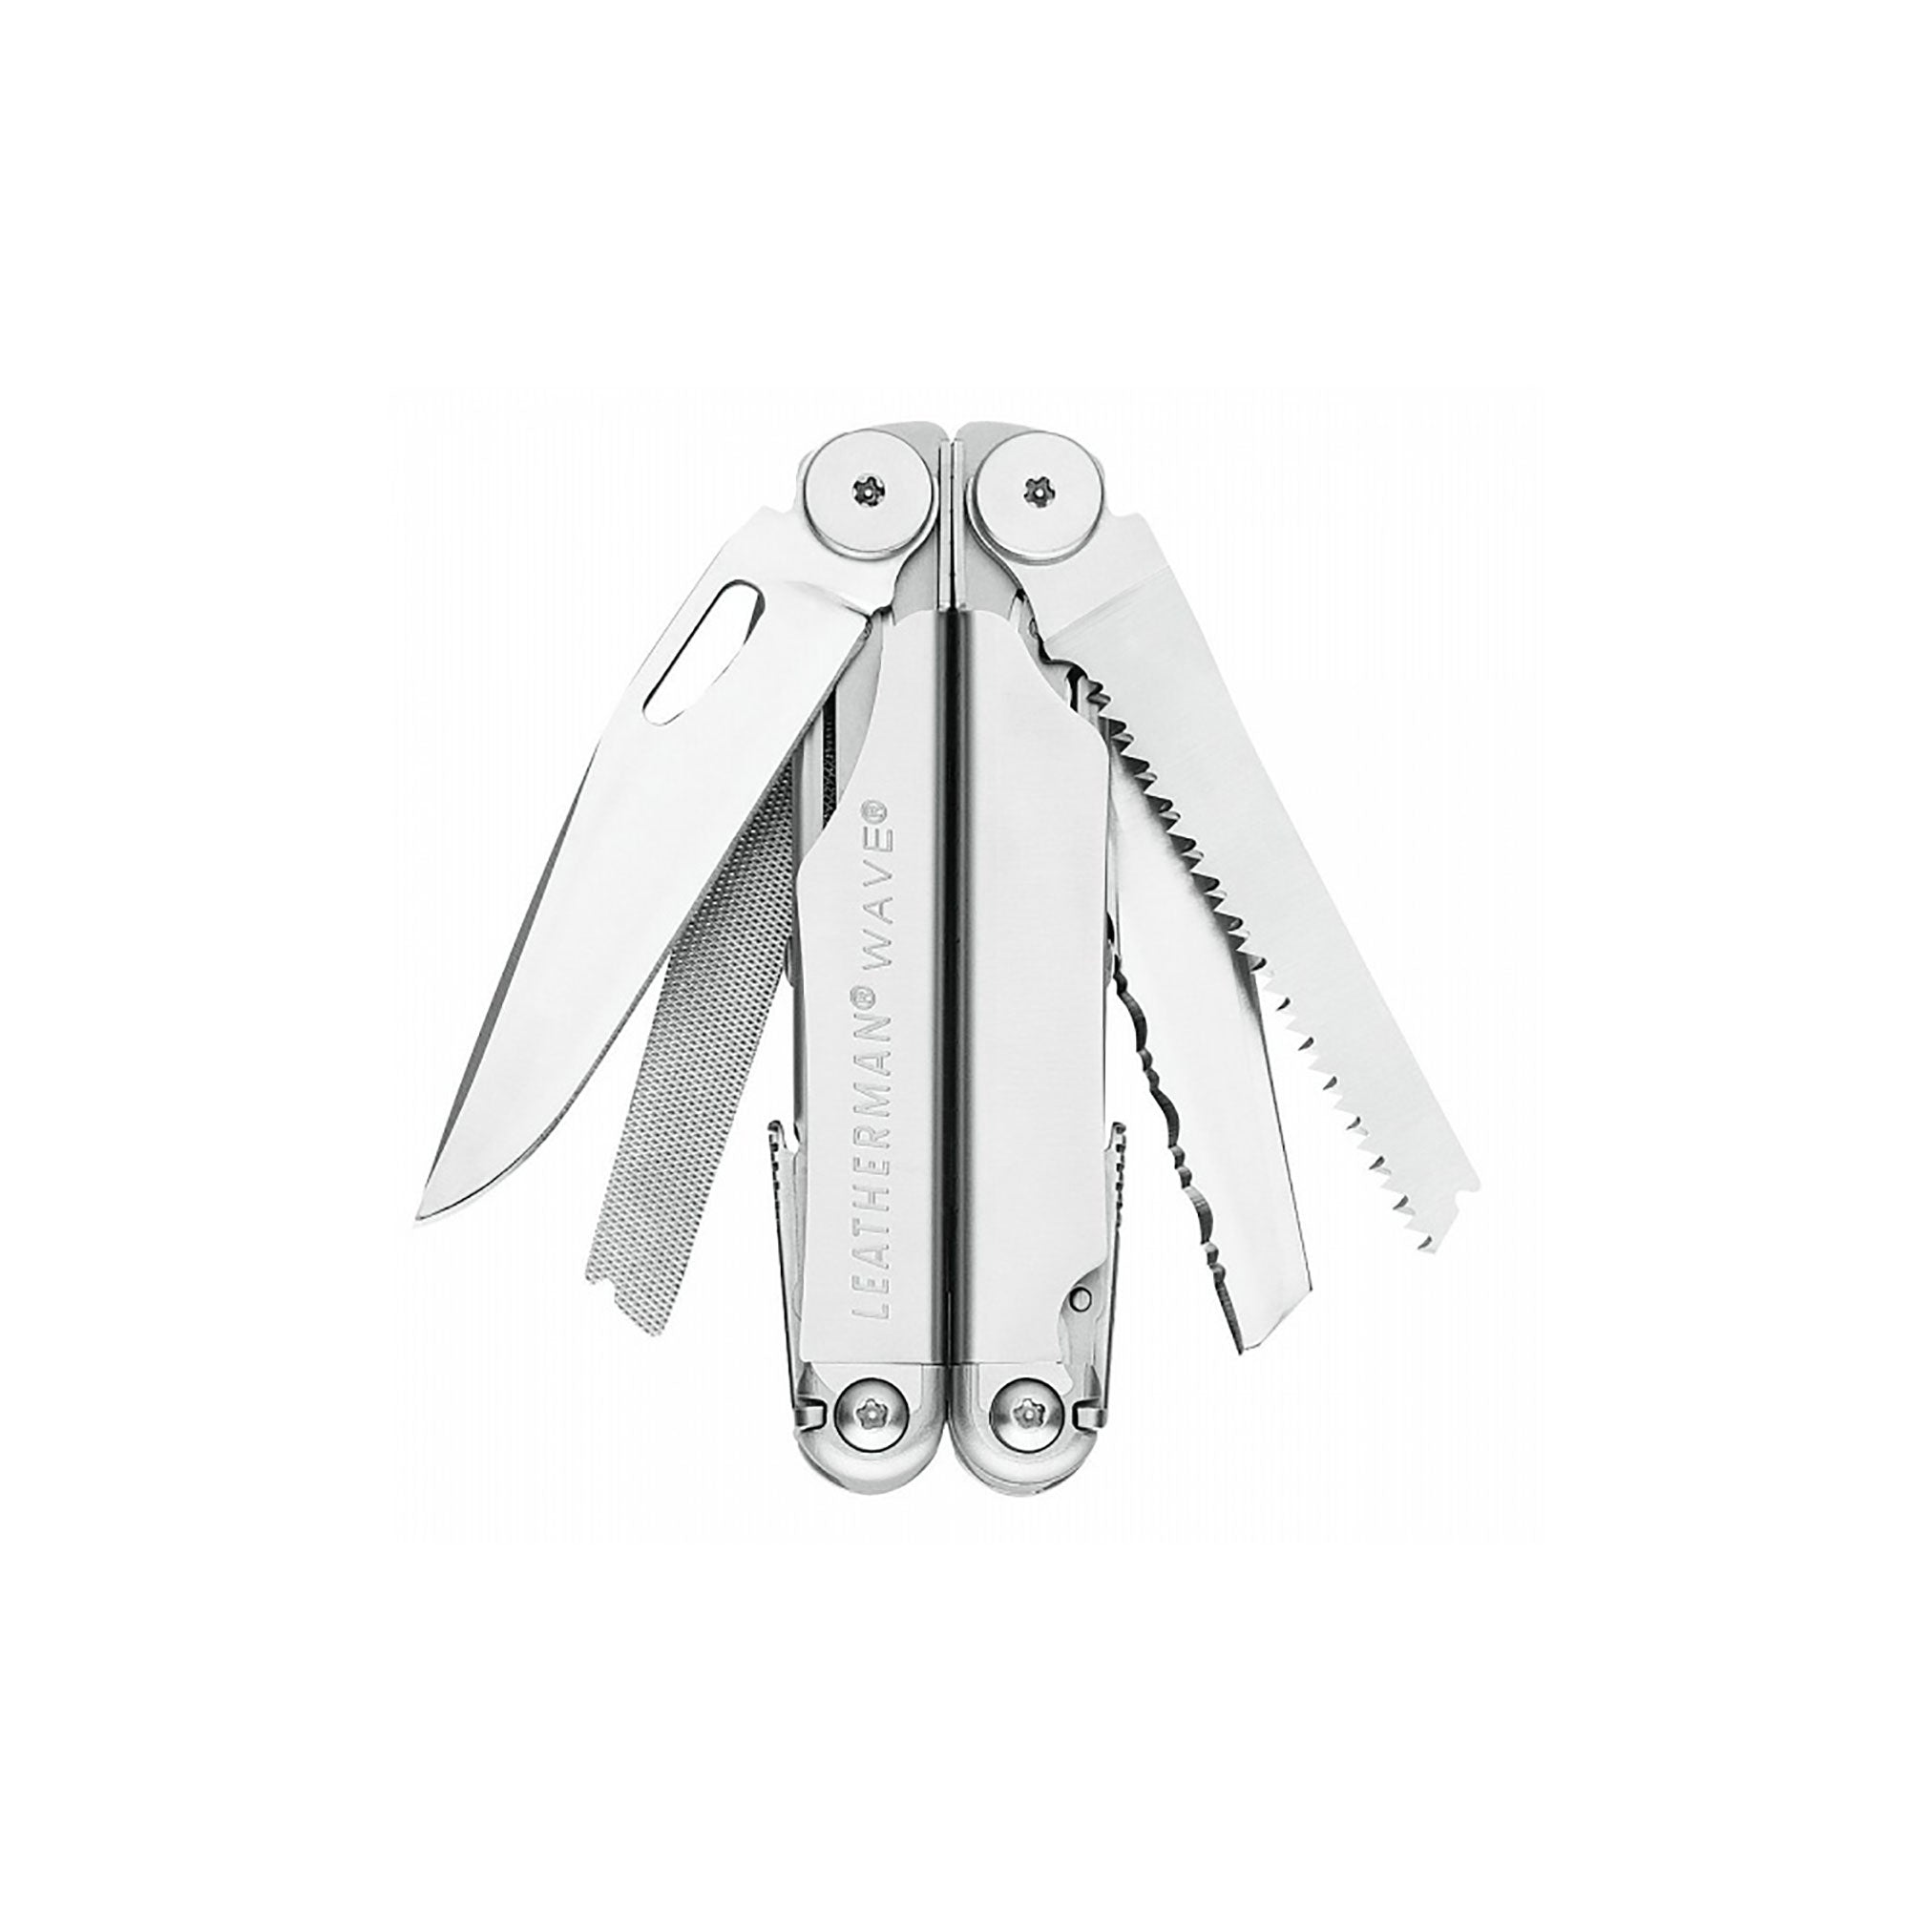 Leatherman Wave - Stainless Steel with Premium Leather Sheath